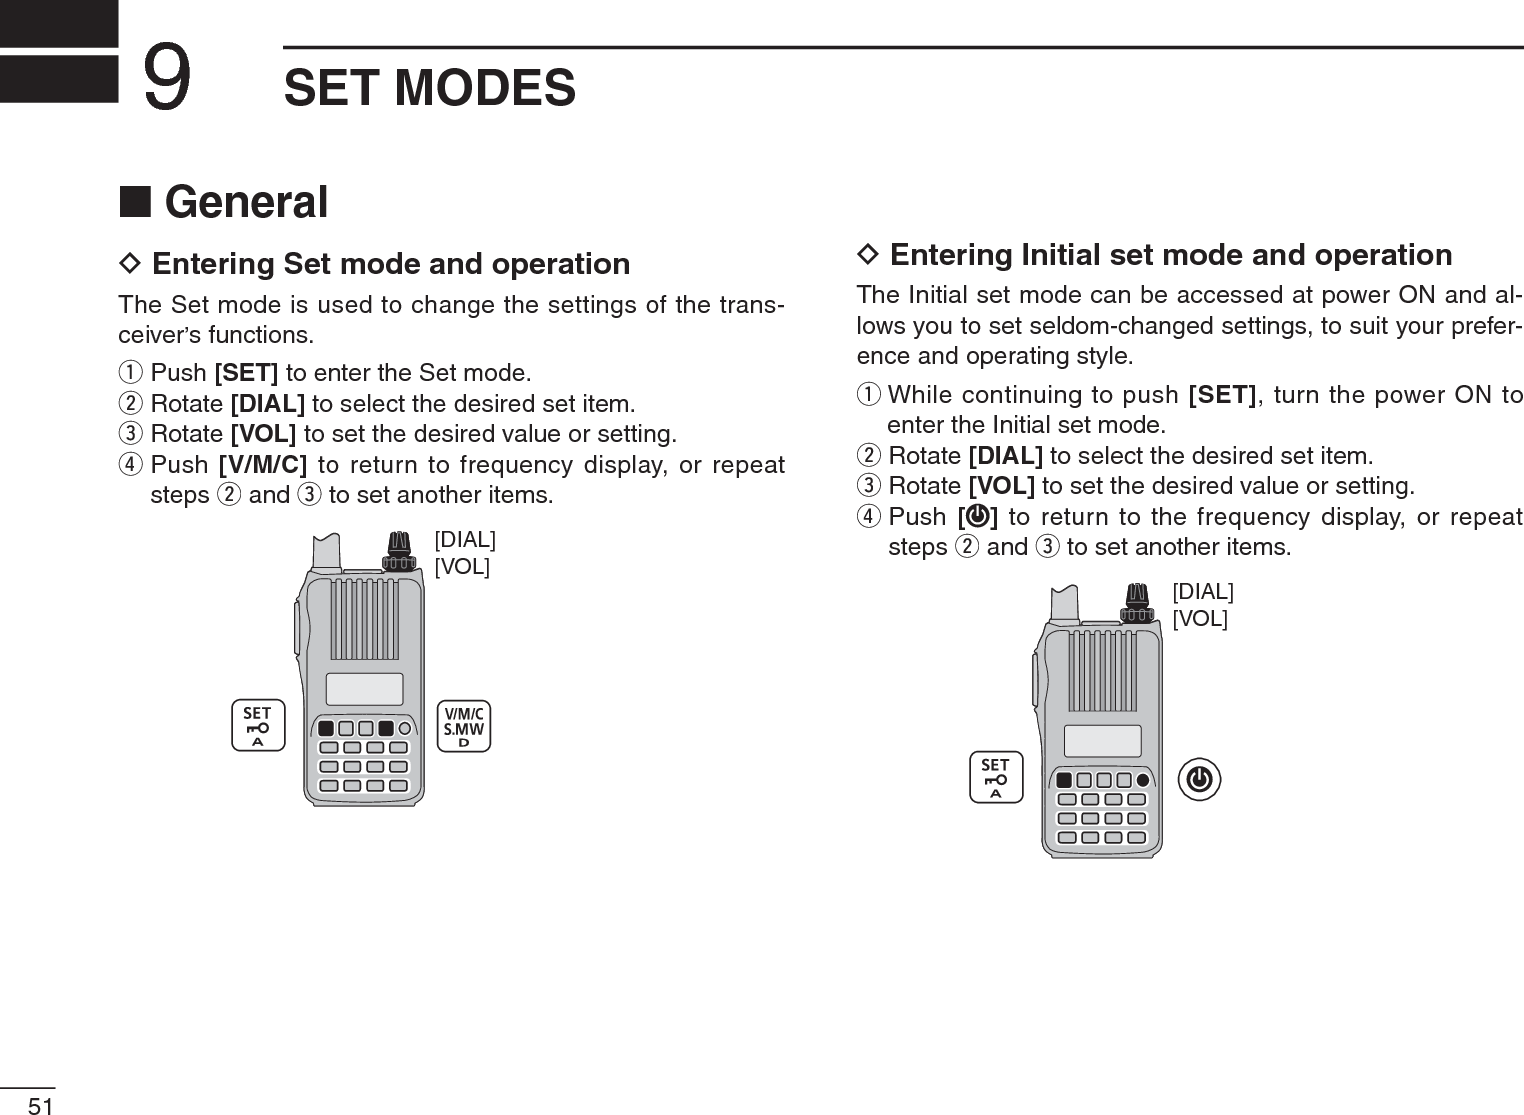 51SET MODES9N GeneralD Entering Set mode and operationThe Set mode is used to change the settings of the trans-ceiver’s functions.q Push [SET] to enter the Set mode.w Rotate [DIAL] to select the desired set item.e Rotate [VOL] to set the desired value or setting.rPush [V/M/C] to return to frequency display, or repeat steps w and e to set another items.[VOL][DIAL]D Entering Initial set mode and operationThe Initial set mode can be accessed at power ON and al-lows you to set seldom-changed settings, to suit your prefer-ence and operating style.qWhile continuing to push [SET], turn the power ON to enter the Initial set mode.w Rotate [DIAL] to select the desired set item.e Rotate [VOL] to set the desired value or setting.rPush [] to return to the frequency display, or repeat steps w and e to set another items.[VOL][DIAL]